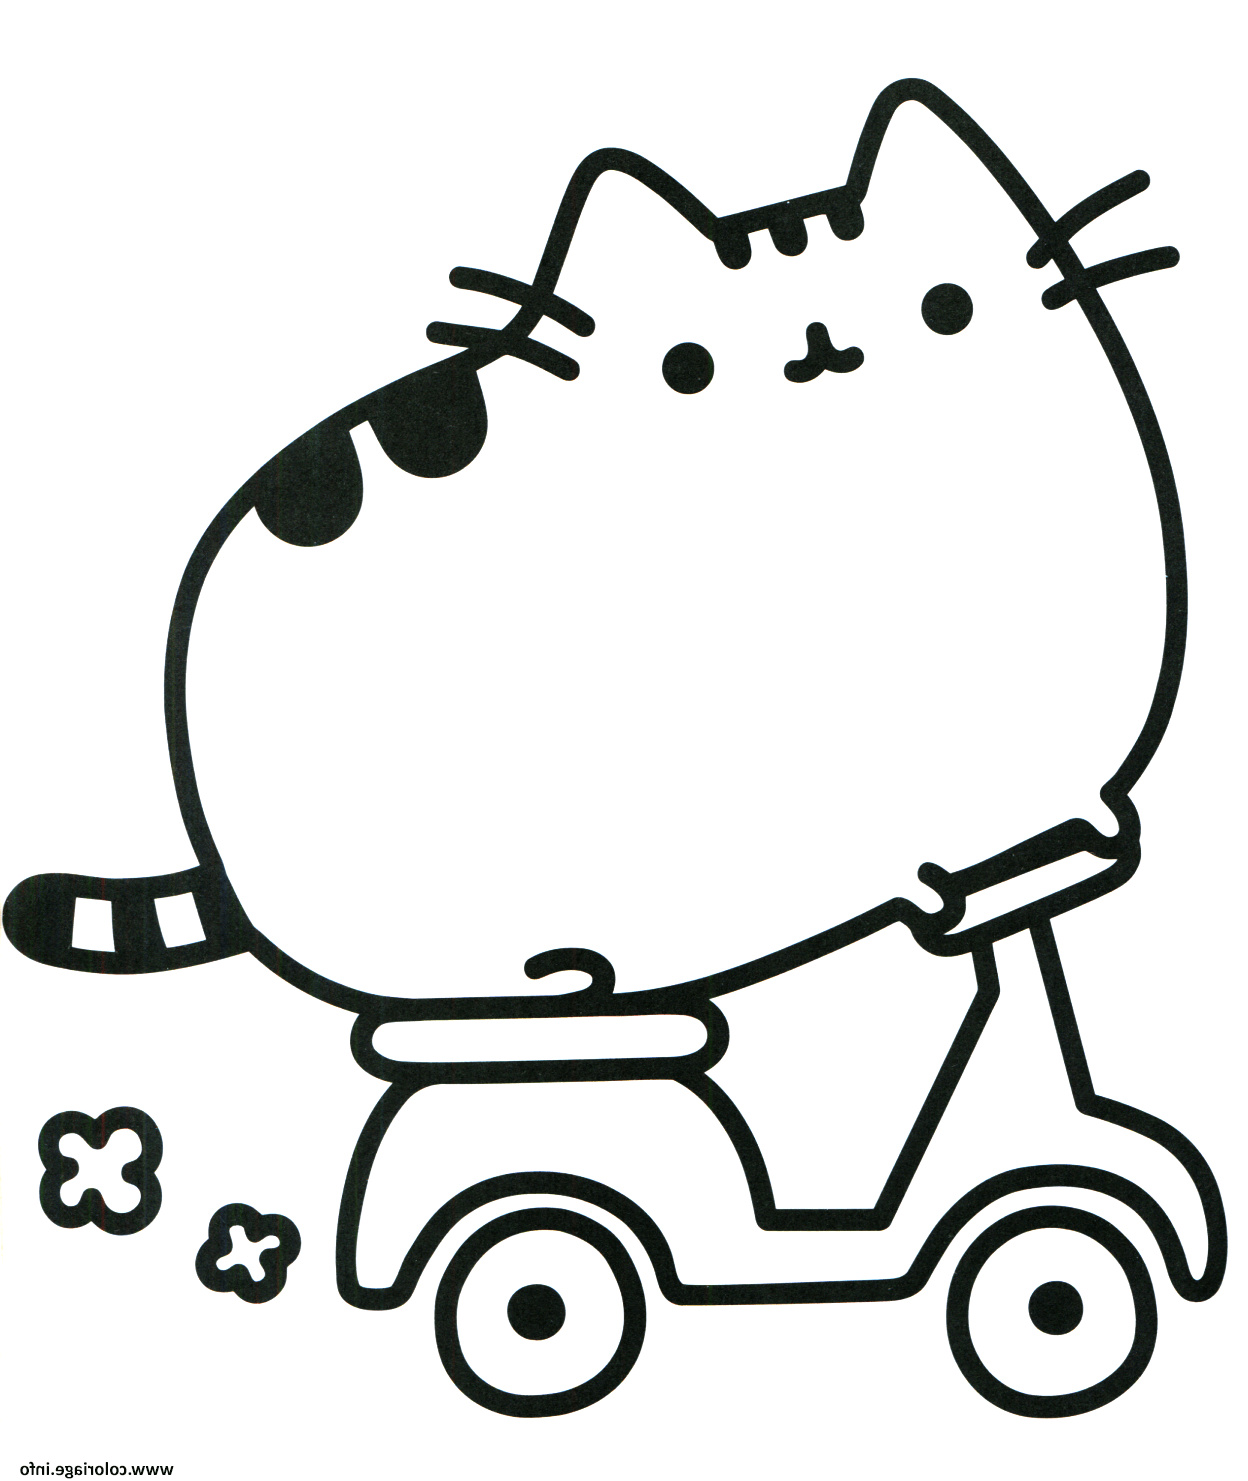 pusheen cat on scooter coloriage dessin